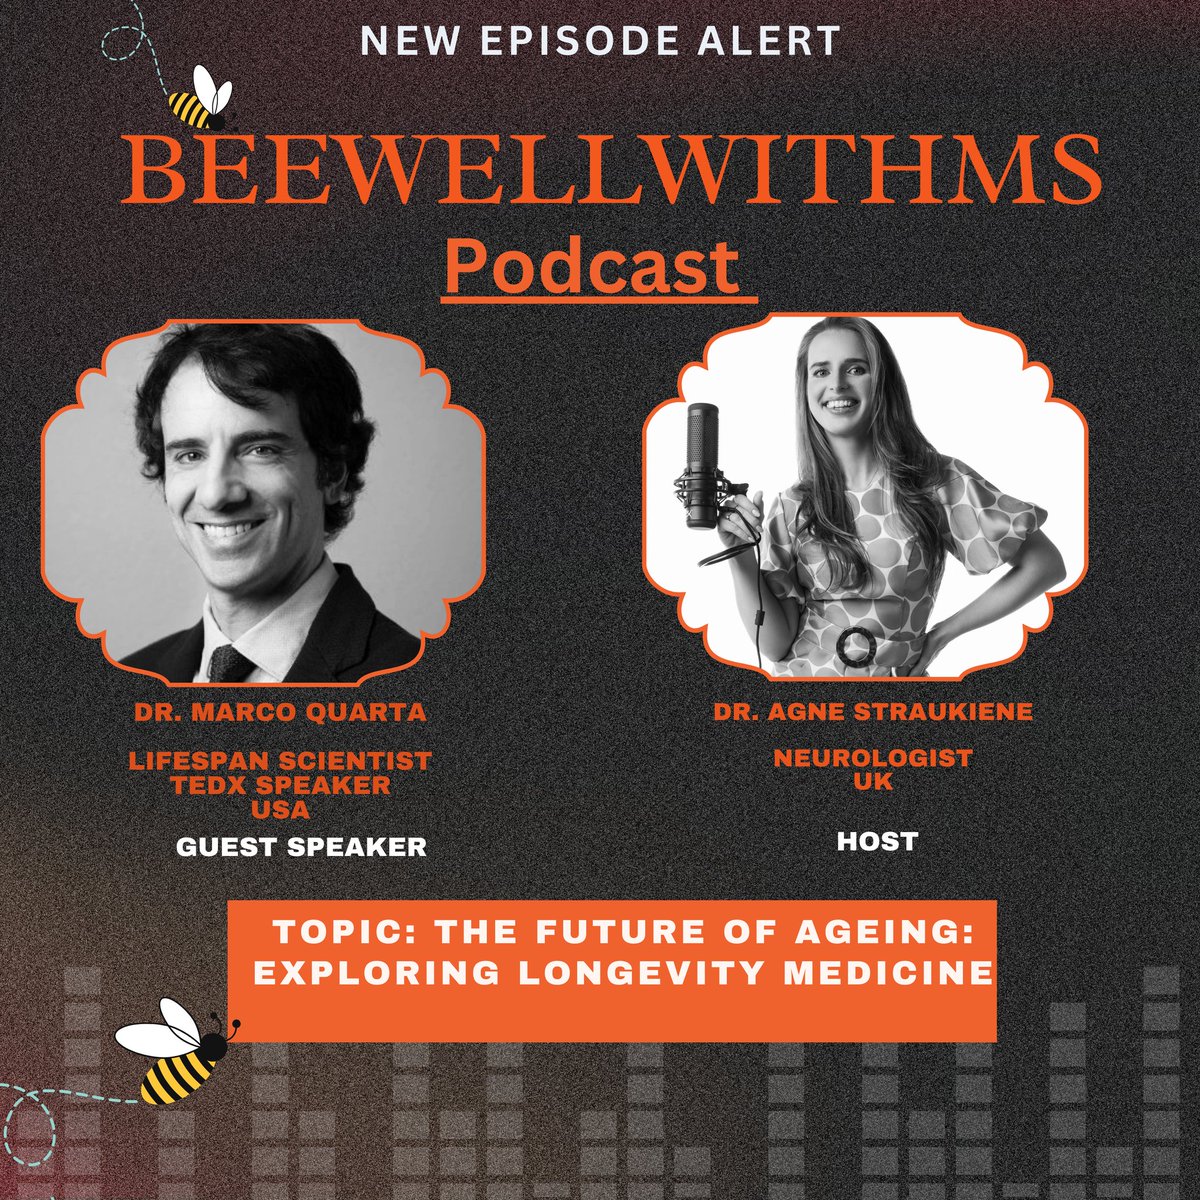 🎙️ Excited to share our latest #BeewellwithMS episode with special guest Dr. @MarcoQuarta12! 🌟 Dive into the future of ageing and how it intersects with #MultipleSclerosis. Everyone will find something valuable in this enlightening discussion. Don't miss out! 🔗